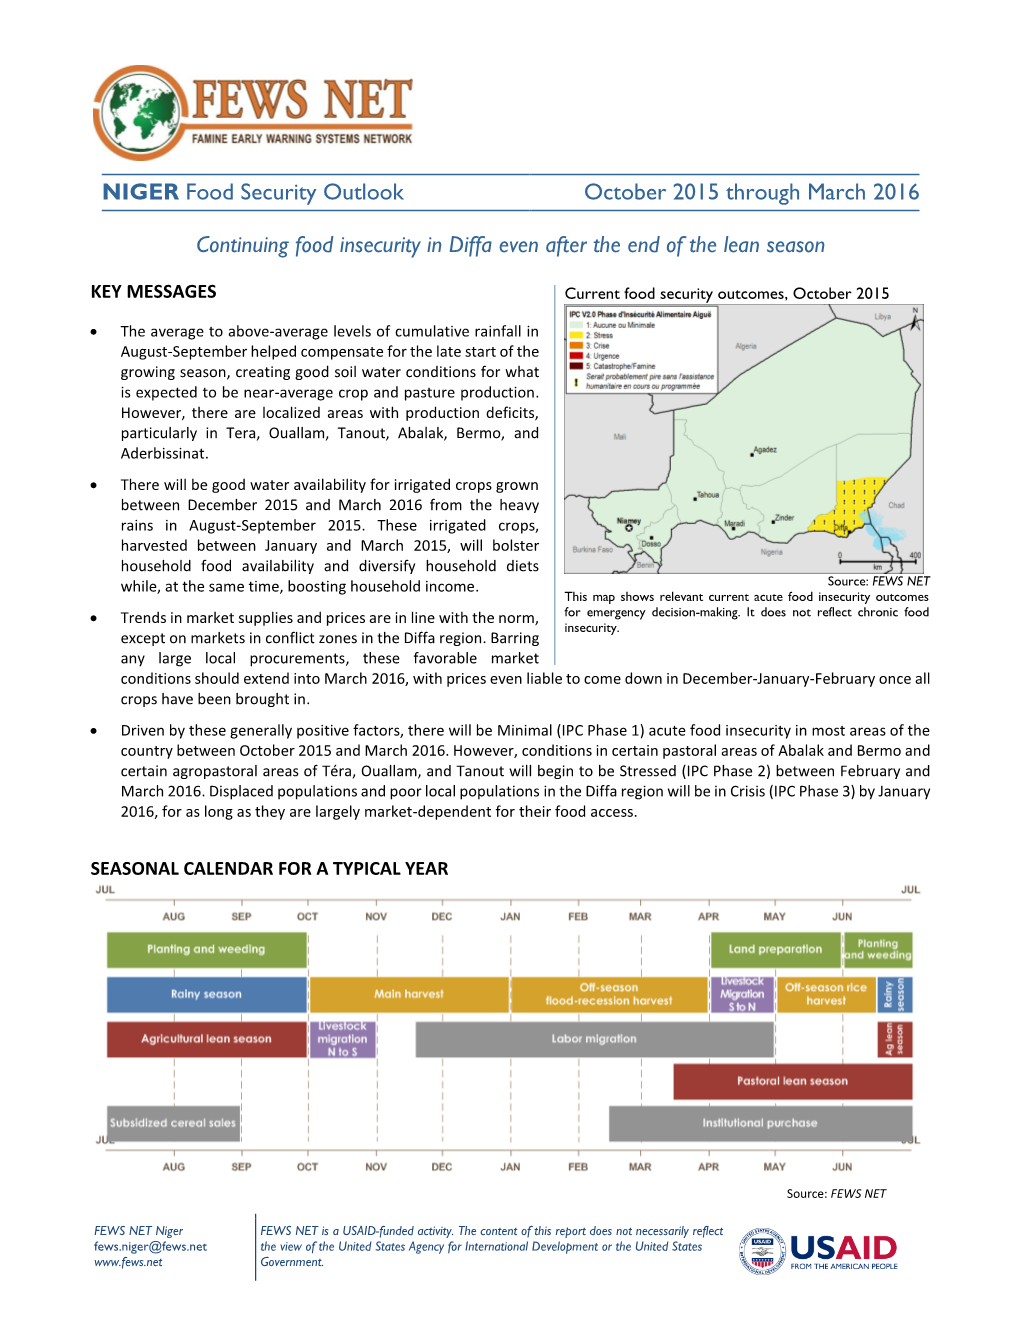 NIGER Food Security Outlook October 2015 Through March 2016